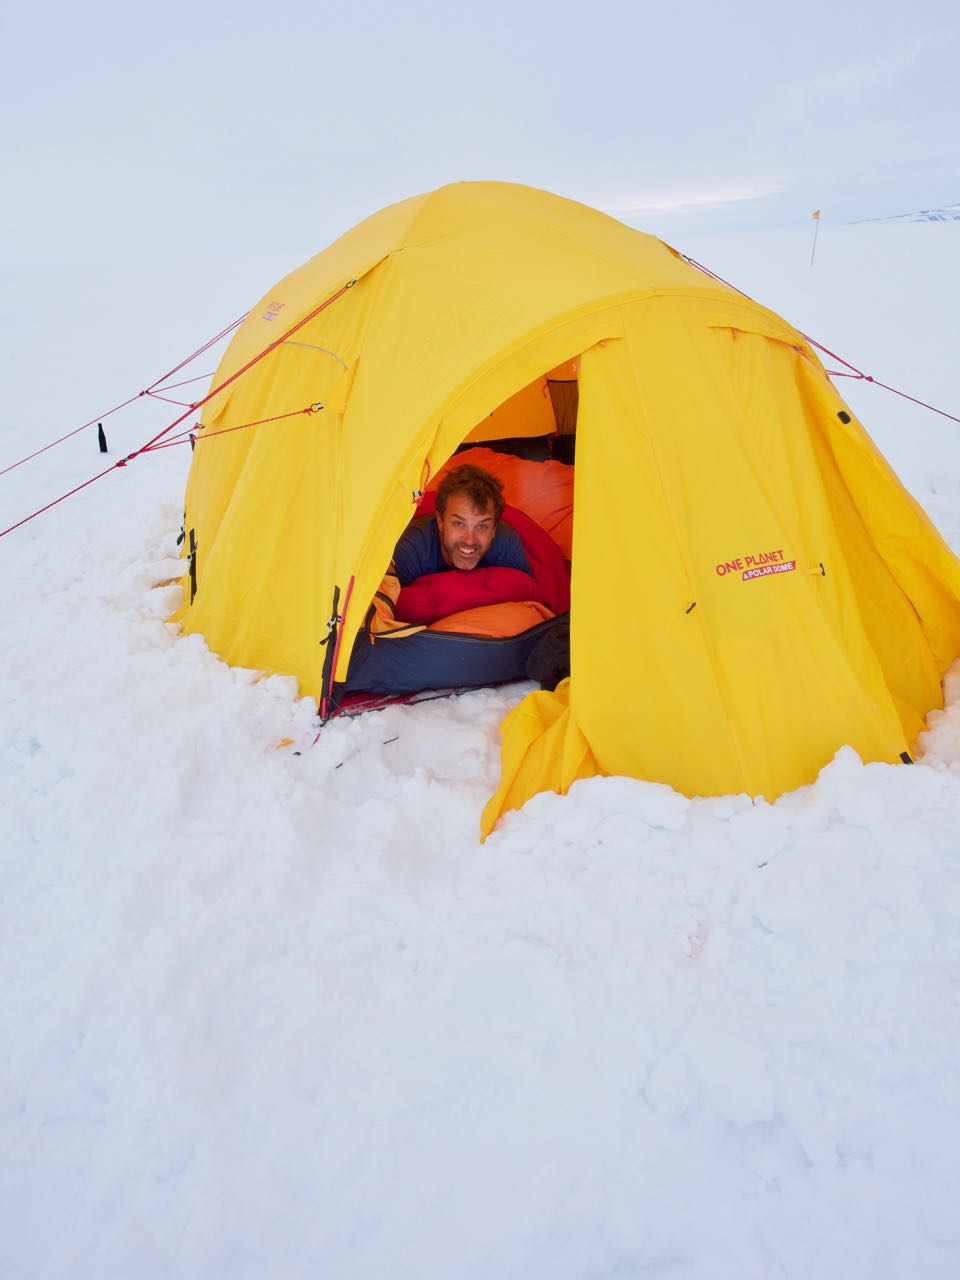 Cozy out of the wind in a double sleeping bag